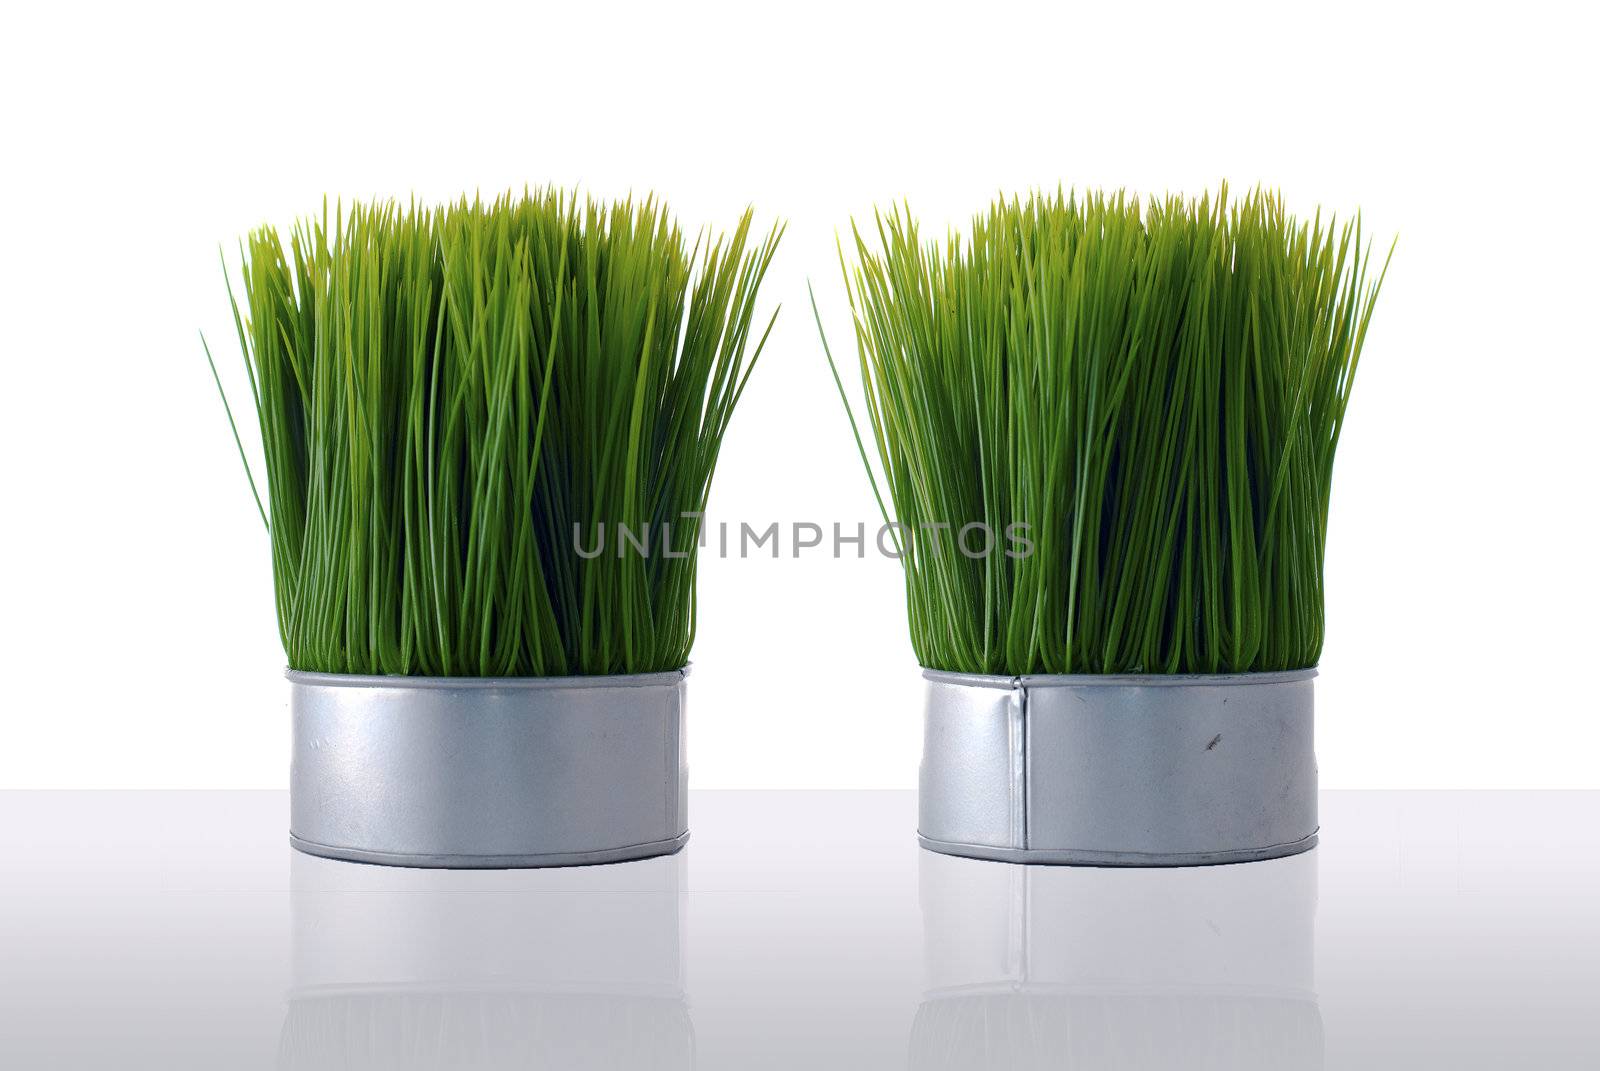 Two aluminum containers with artificial green grass isolated from the white background and on top of a reflective white surface.